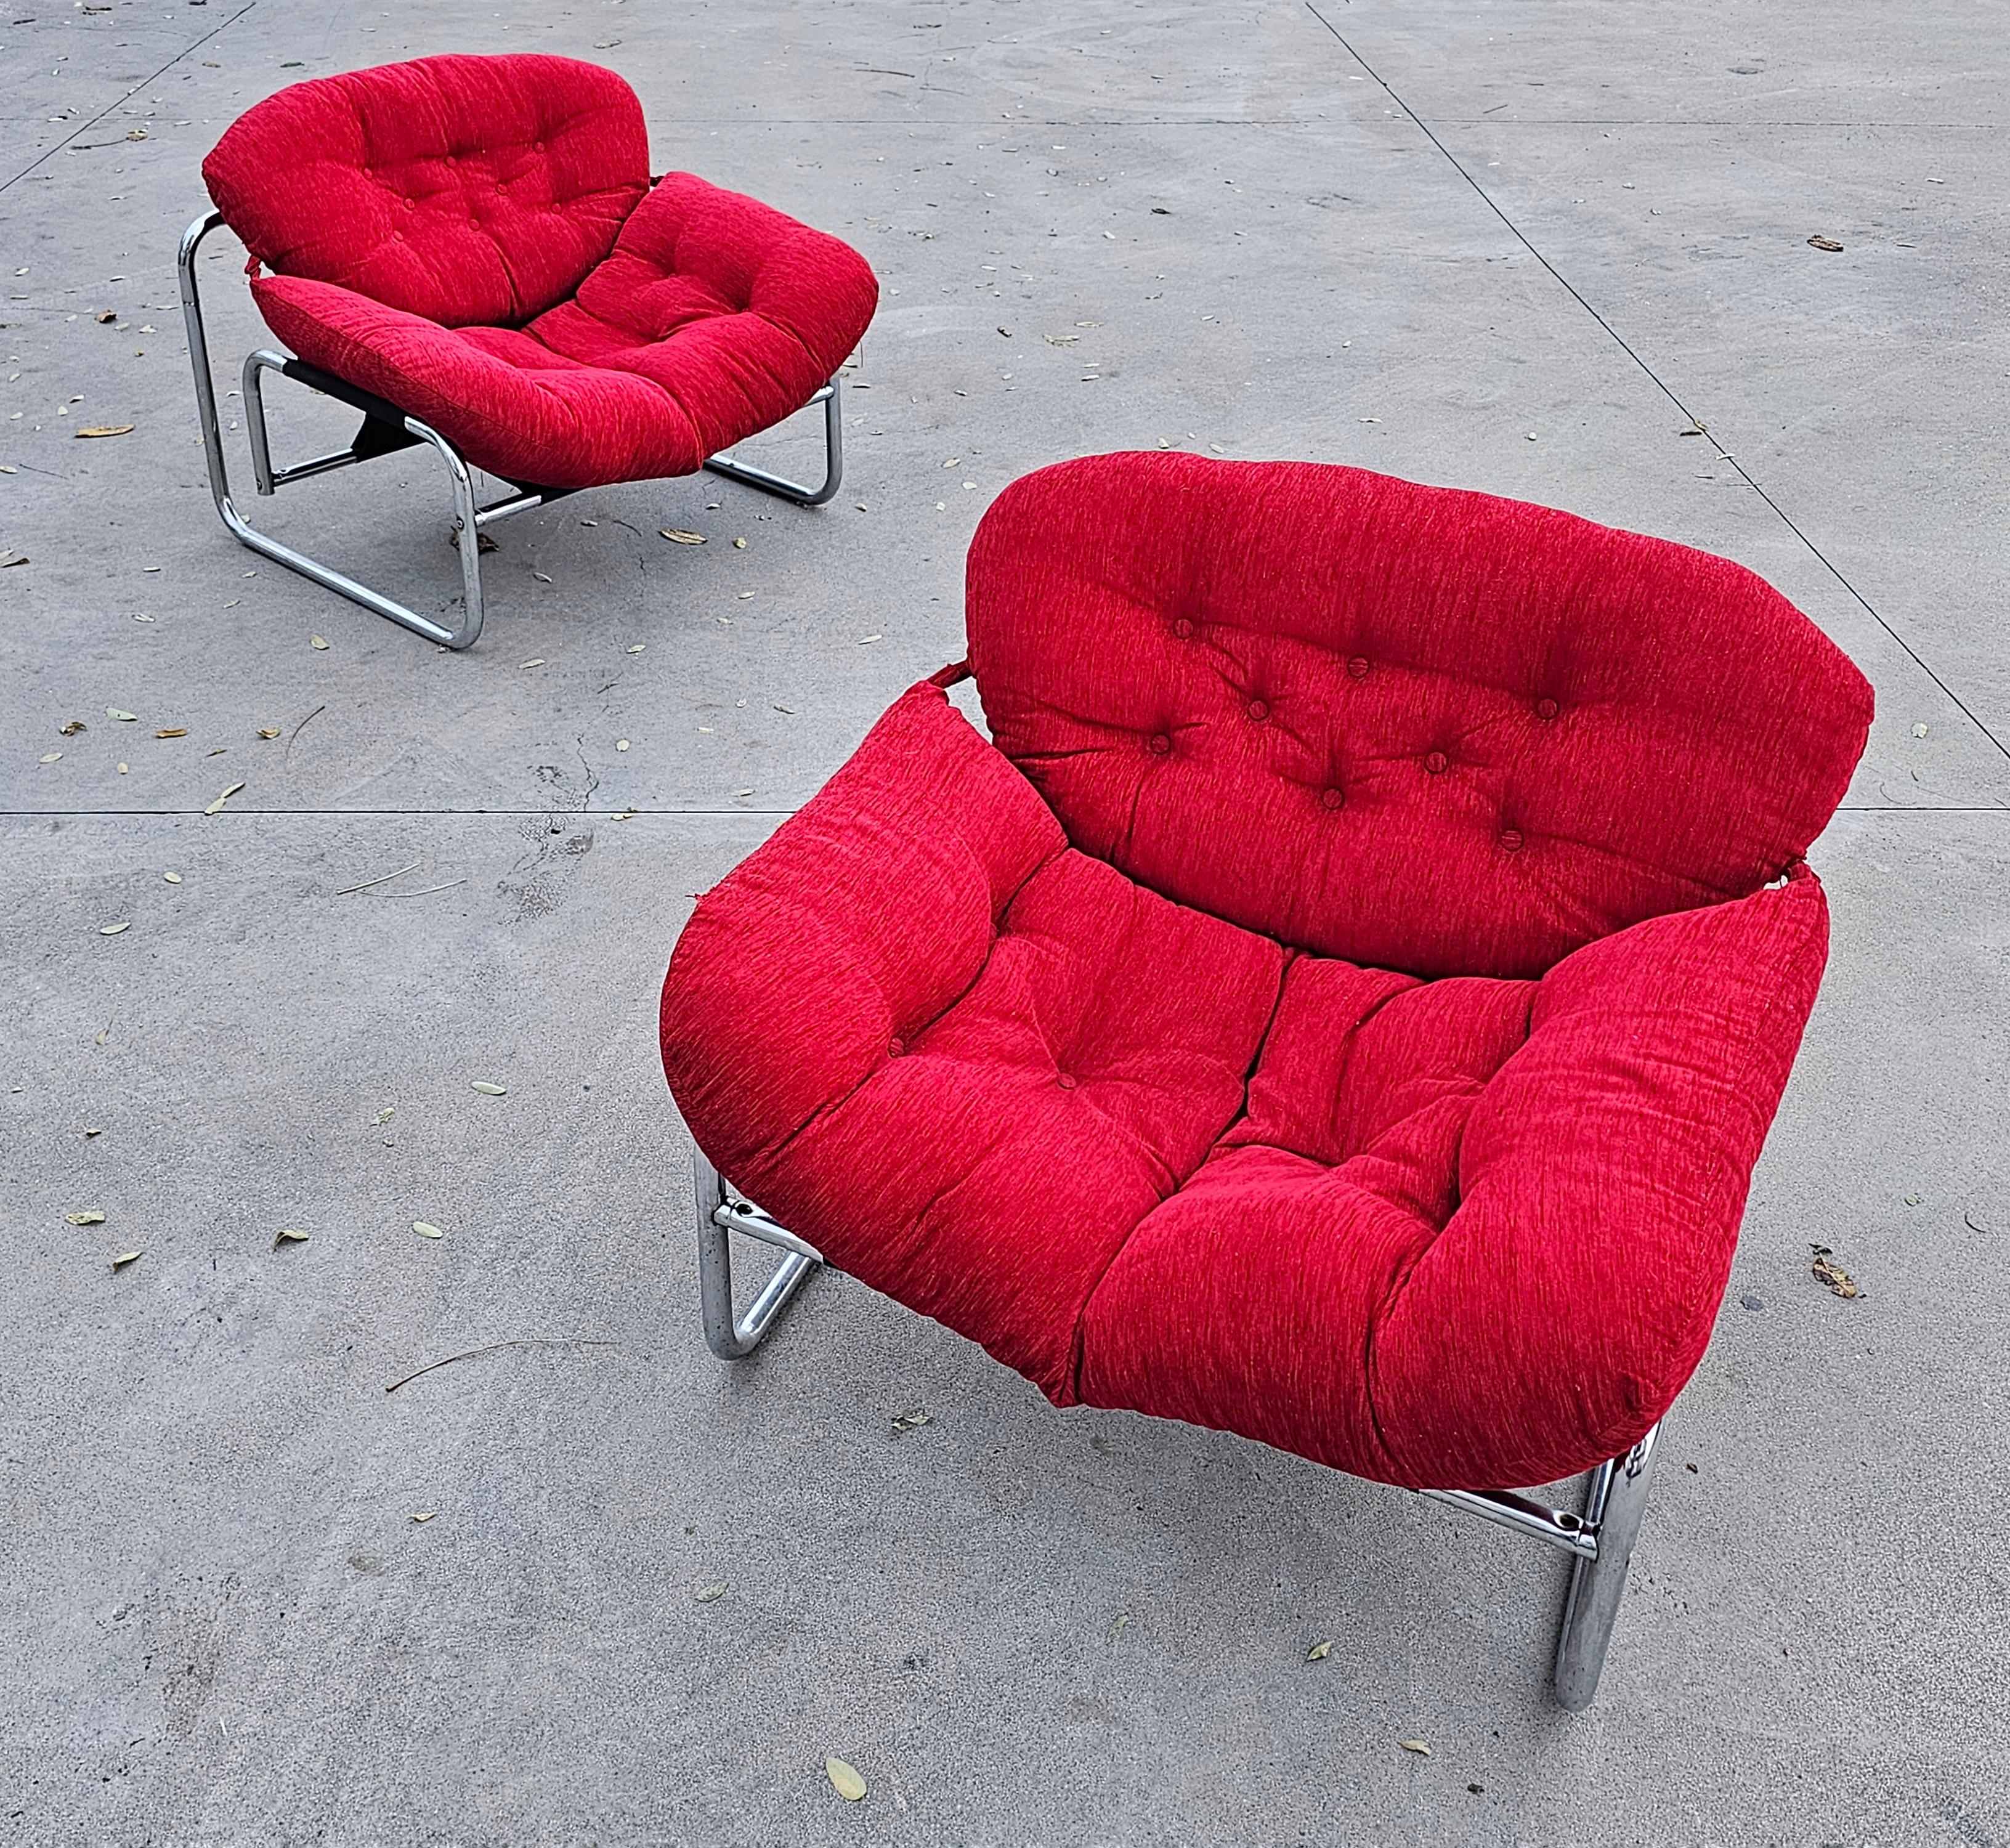 In this listing you will find two Postmodern Lounge Chairs designed by Johan Bertil Häggström for Swed Form. The chair features a Bauhaus-style tubular chrome frame with a fluffy, large seat made of red velvet, which makes these chairs very